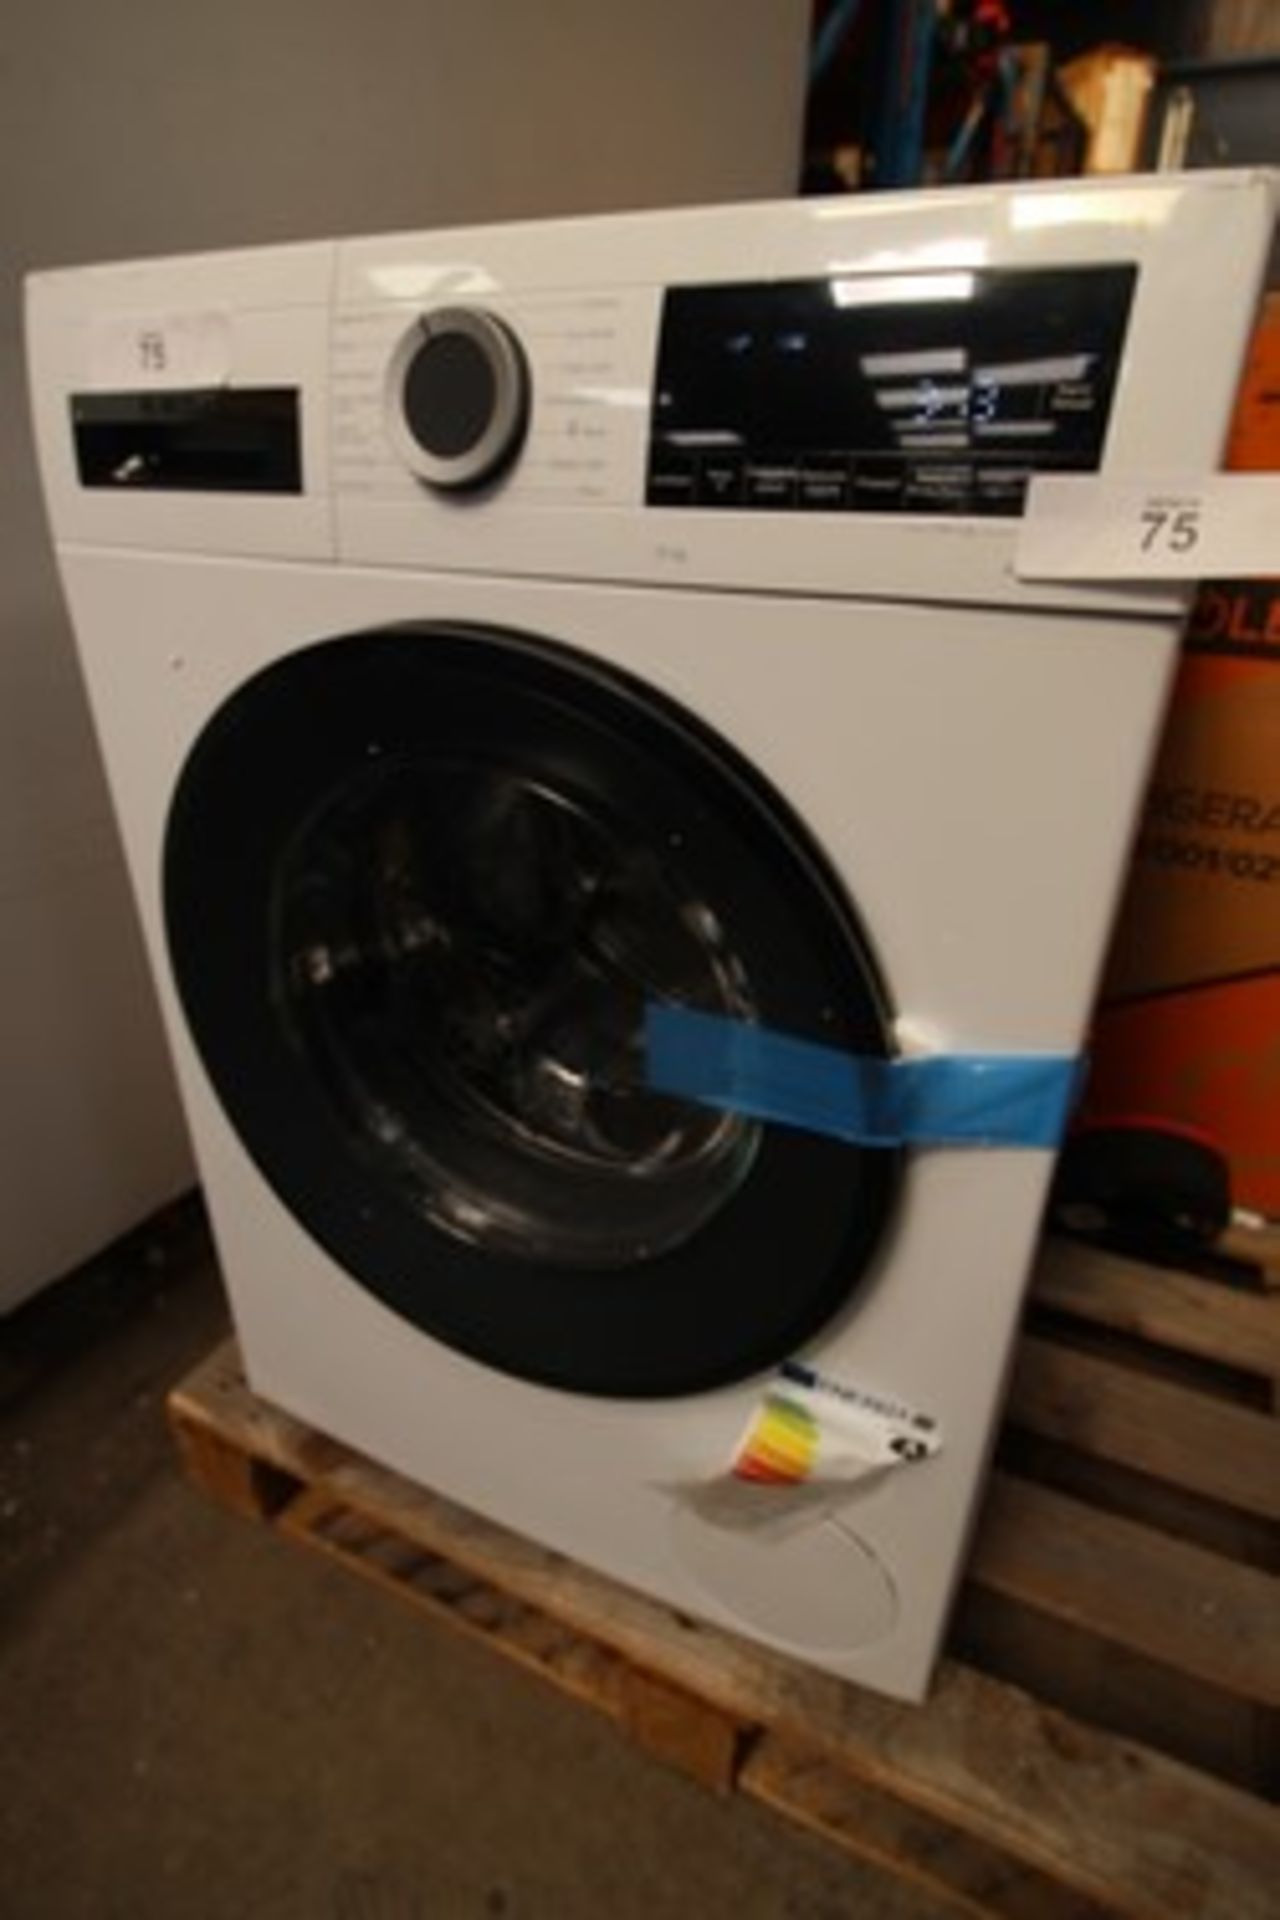 1 x Bosch 10kg washing machine, model No: WGG25402GB, large dent on right panel, powers on ok, not